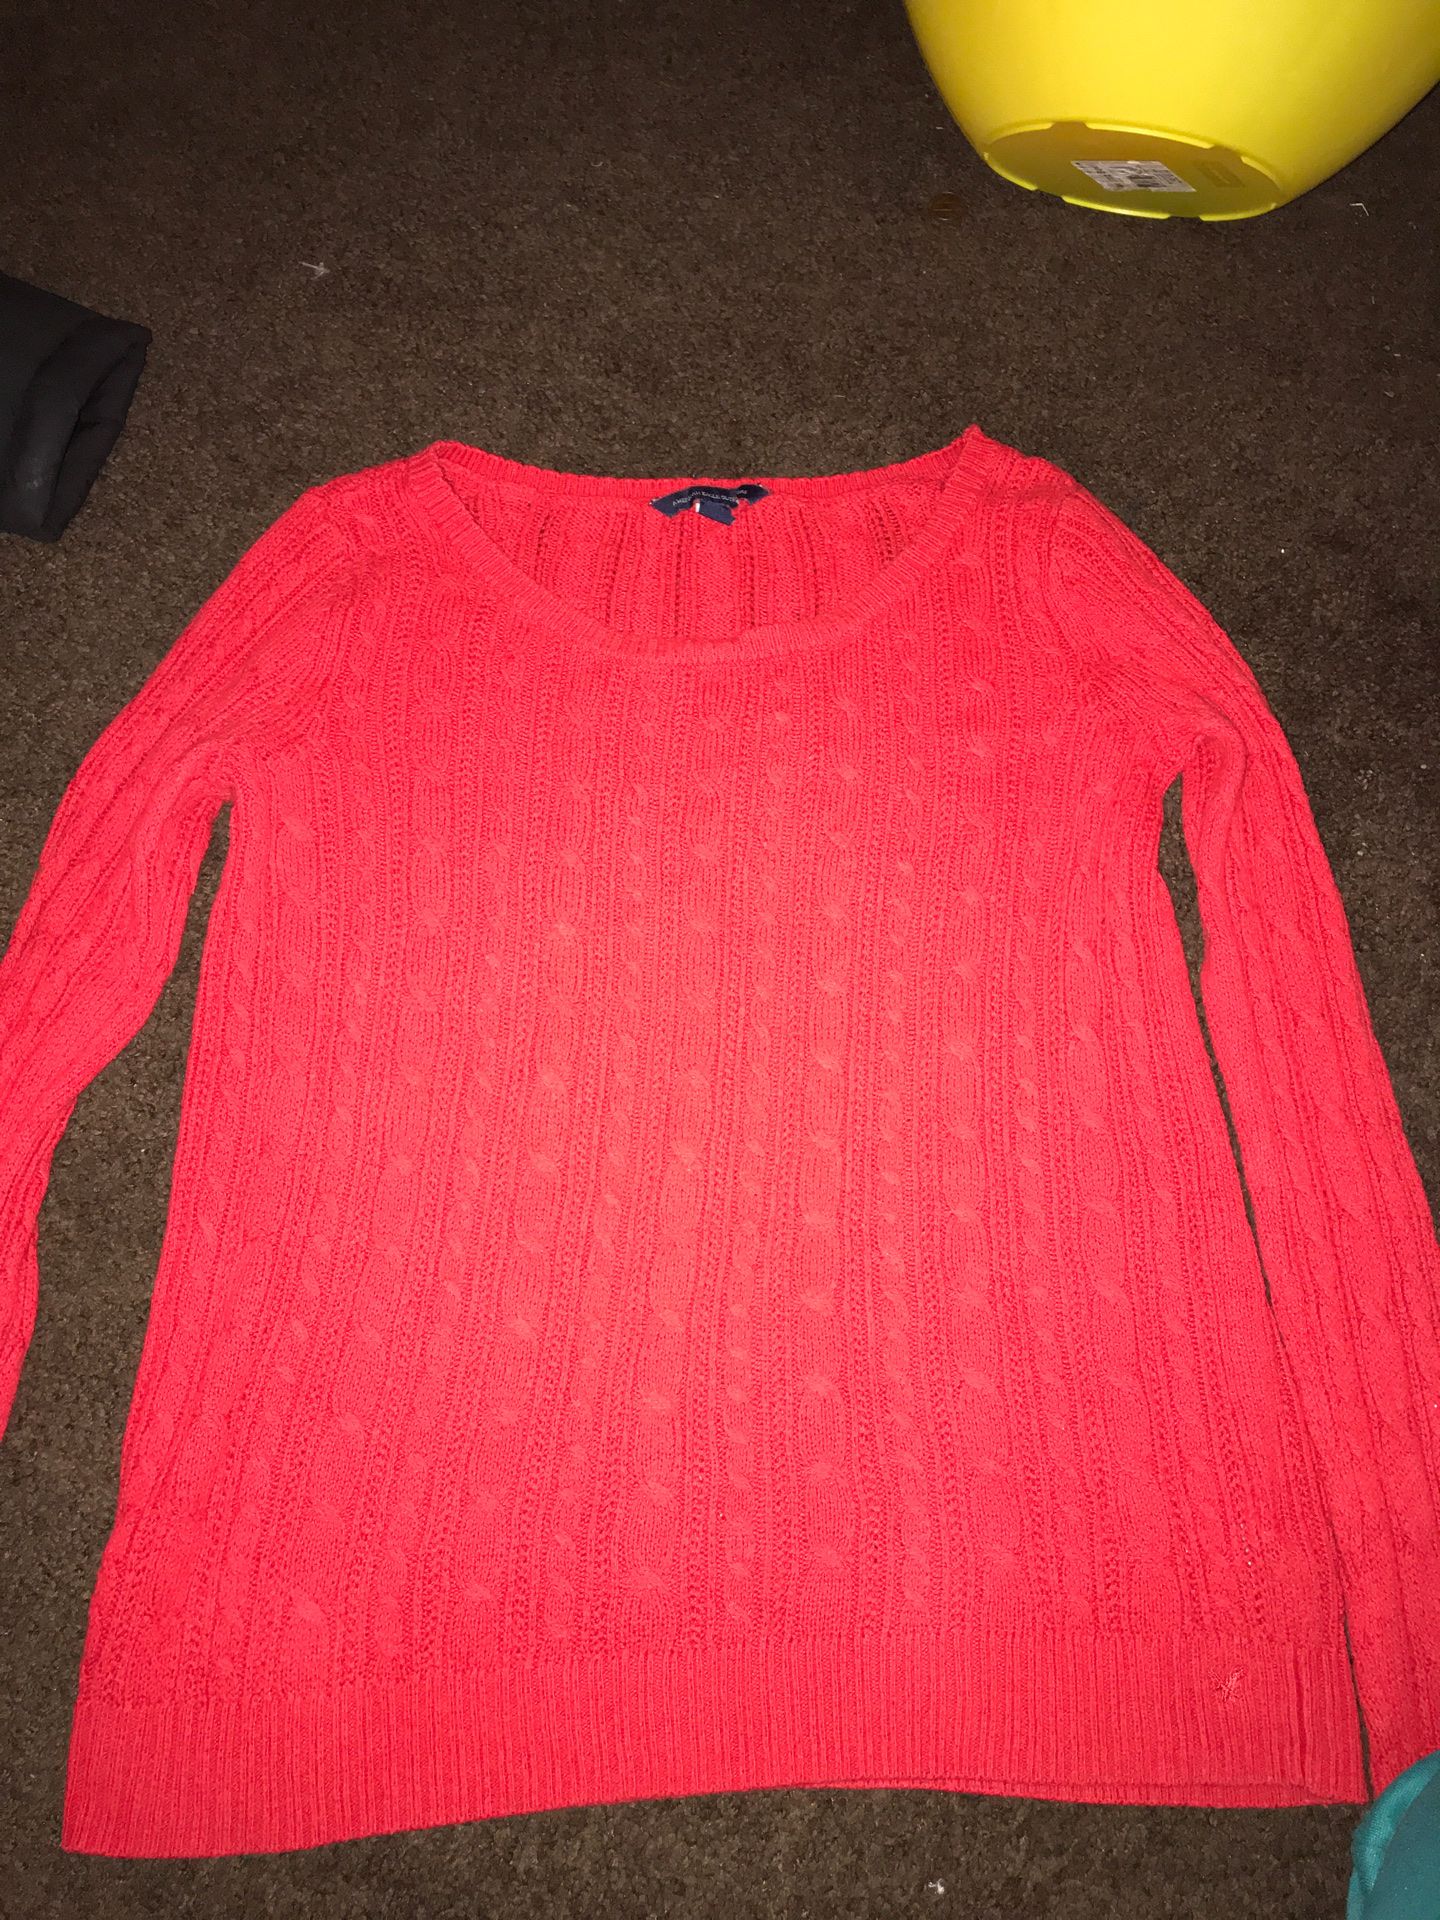 American Eagle OutFitters Red Long Sleeve